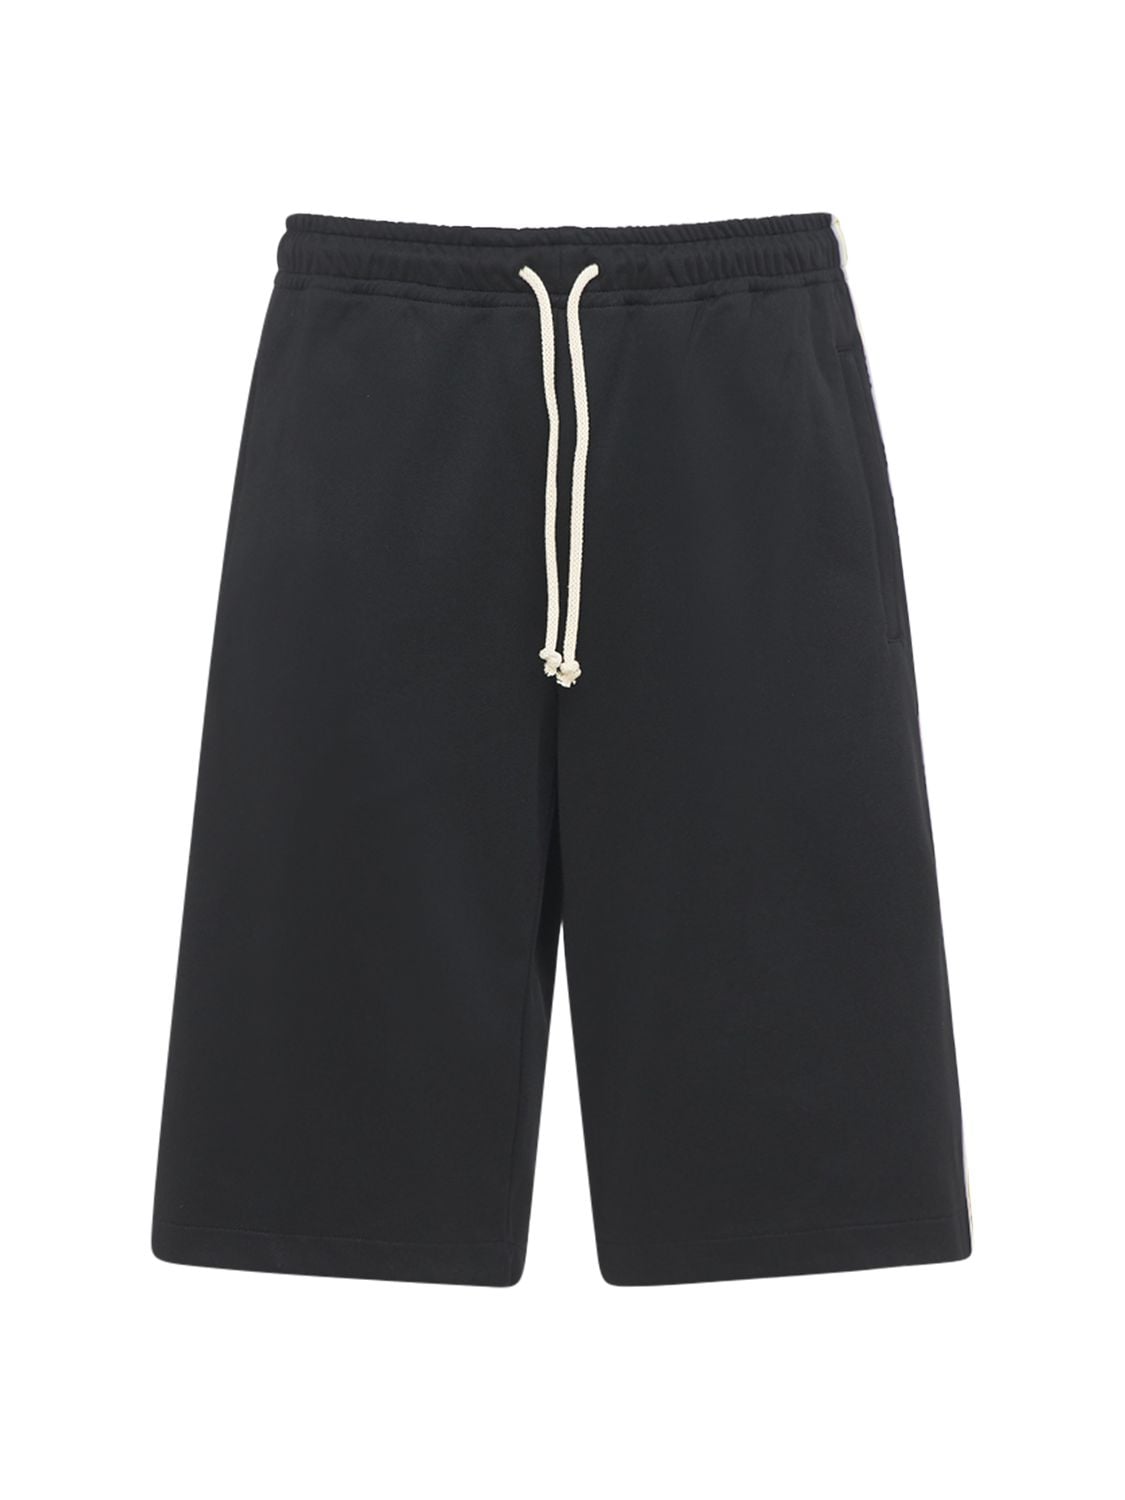 Image of Technical Jersey Shorts W/side Bands